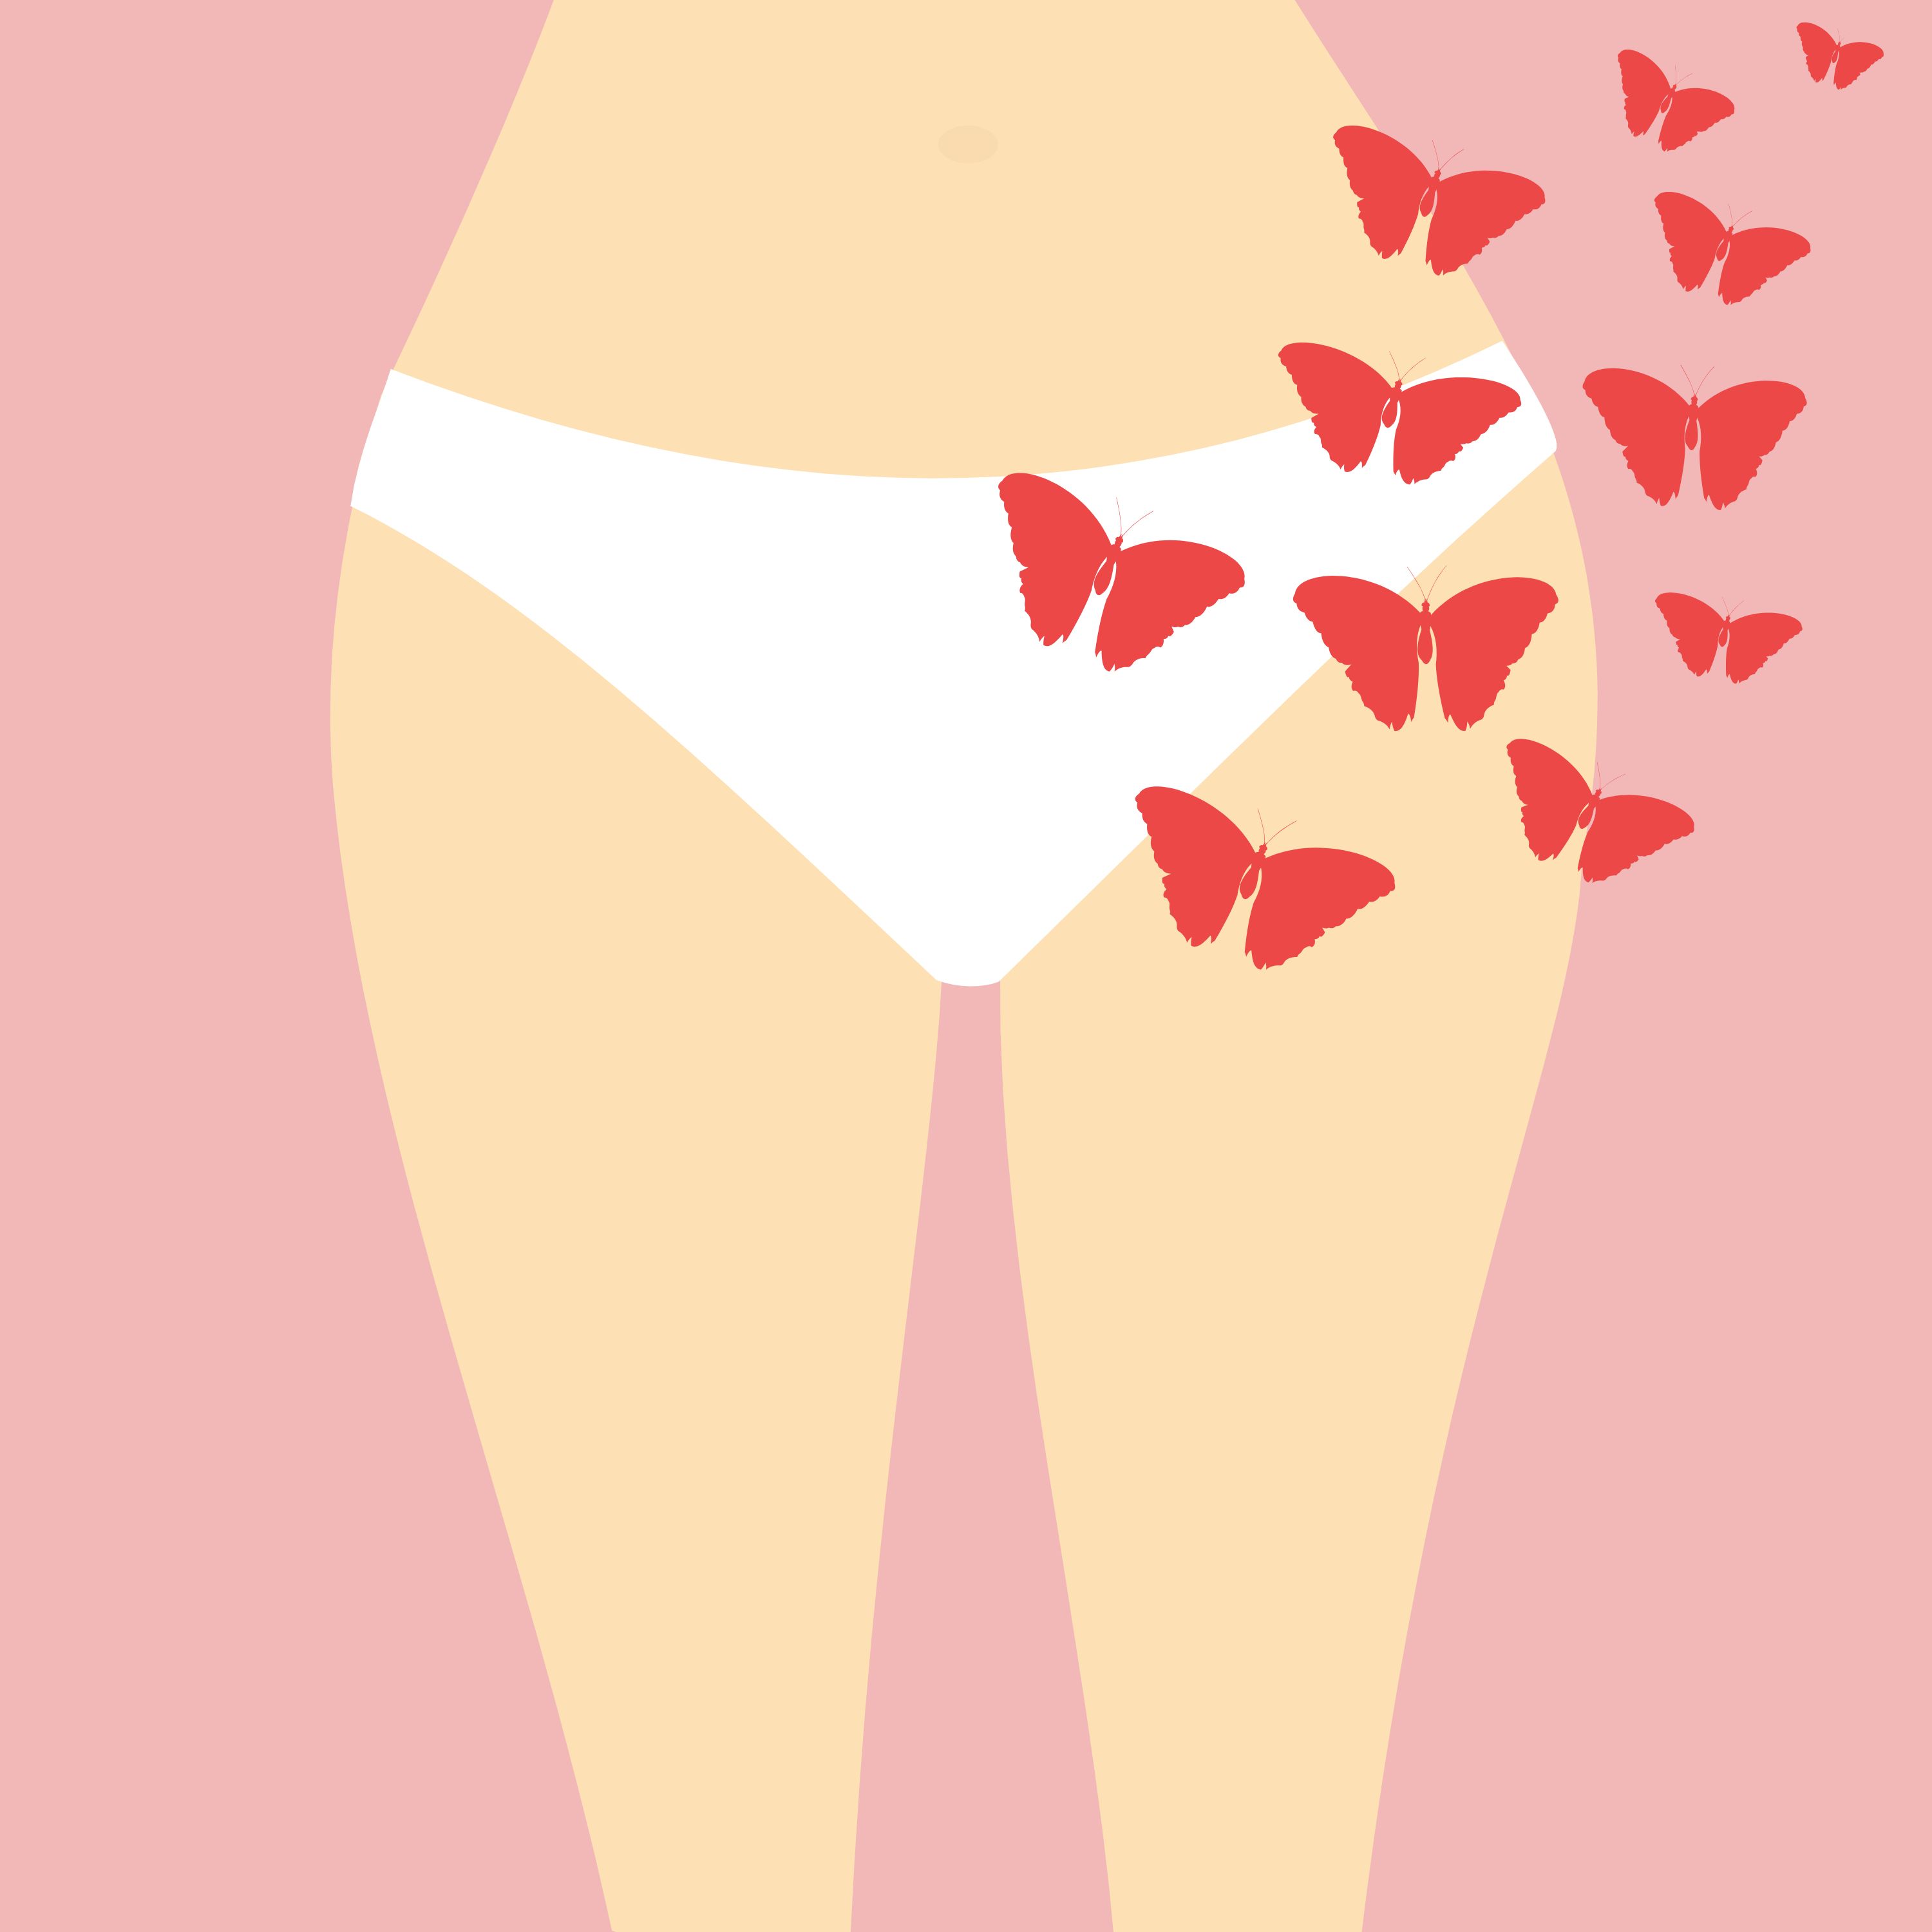 How to identify the symptoms of premenstrual dysphoric disorder